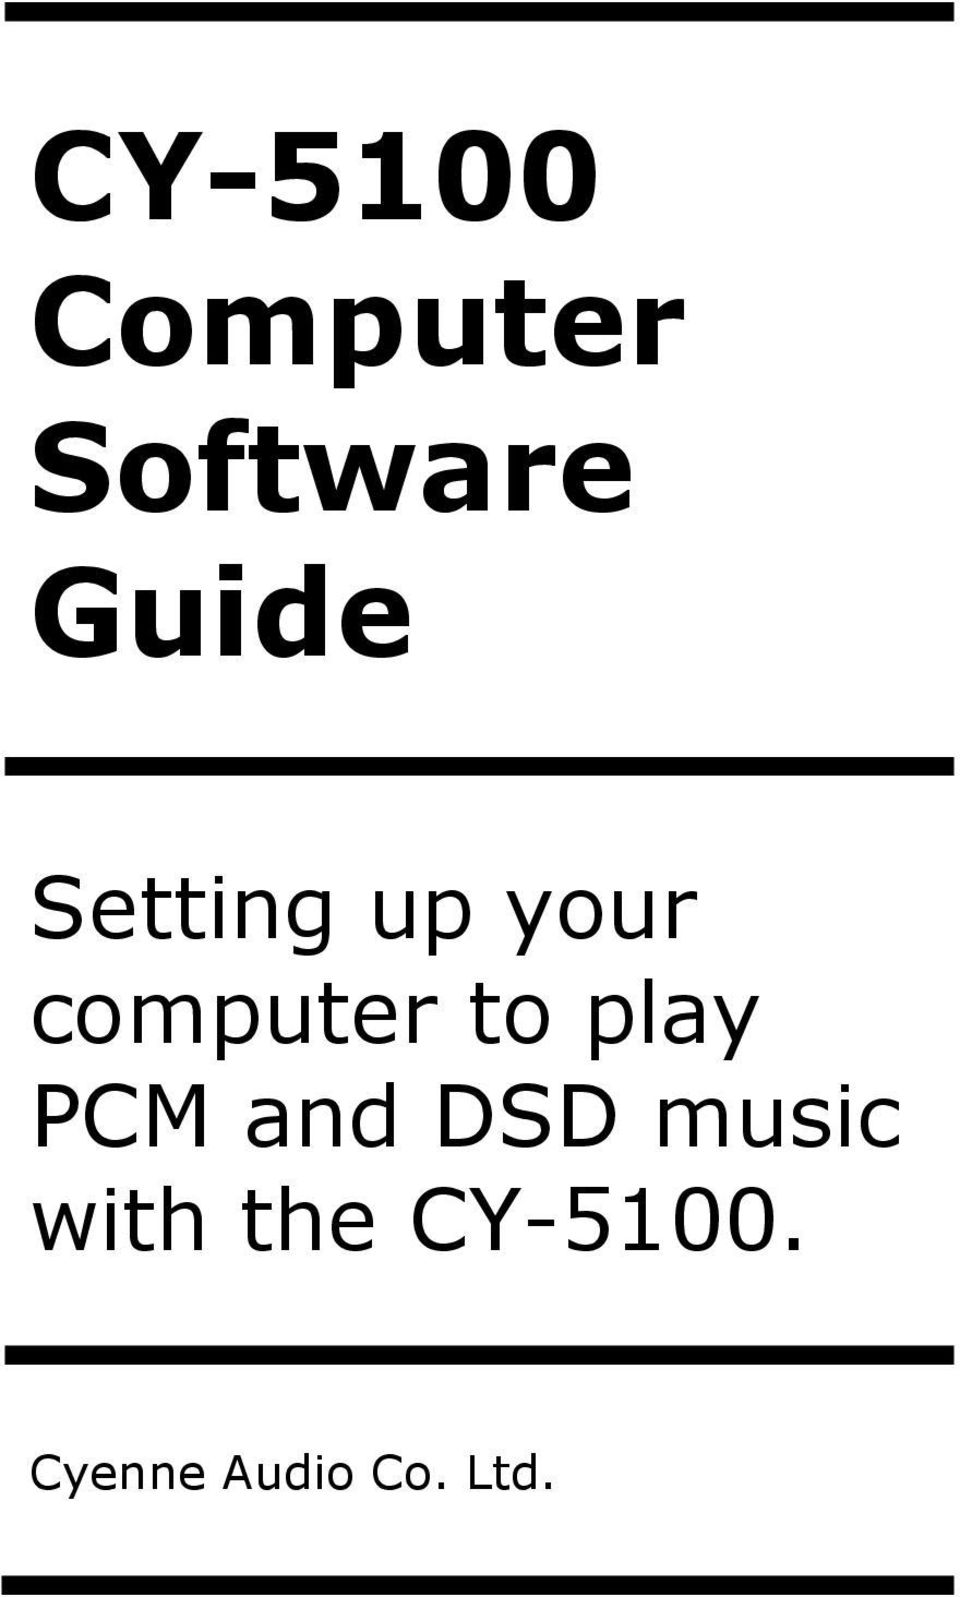 to play PCM and DSD music with